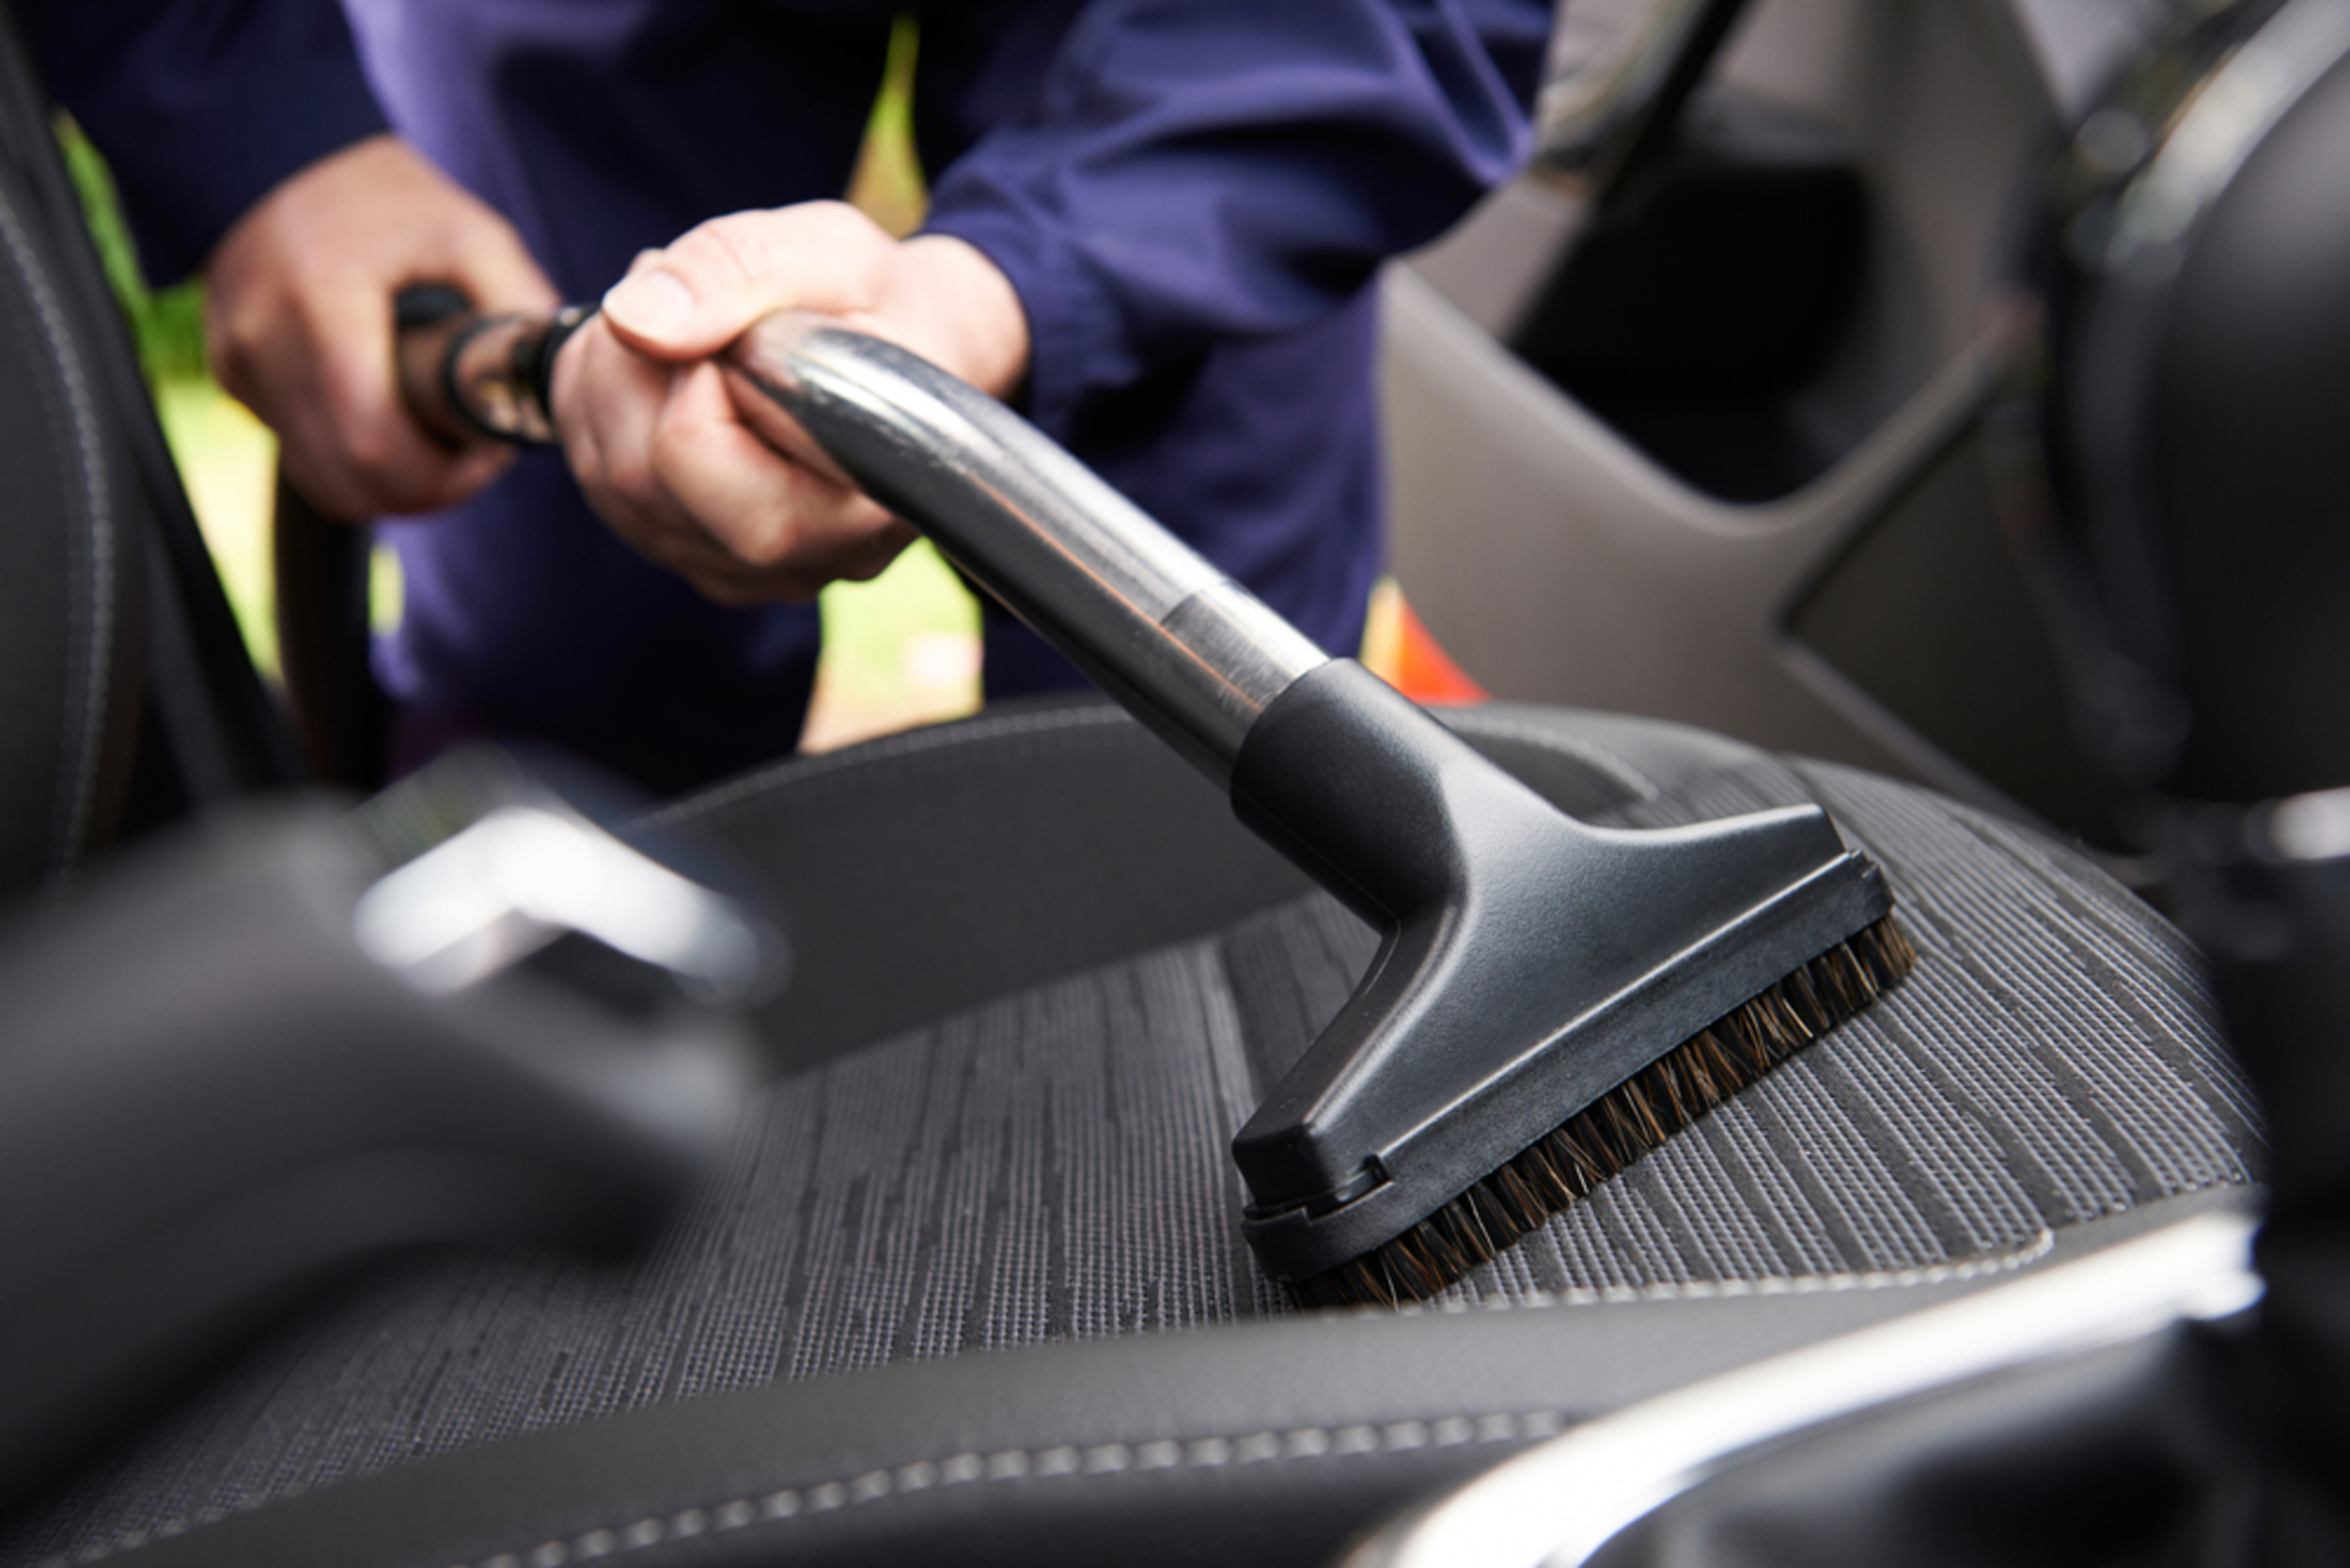 <p>No one wants to travel in a dirty car. Take yours in for an inexpensive detail job, or DIY it by vacuuming all your surfaces, removing any trash and junk from your backseat, and wiping down cup holders. </p><p><a href='https://www.msn.com/en-us/community/channel/vid-cj9pqbr0vn9in2b6ddcd8sfgpfq6x6utp44fssrv6mc2gtybw0us'>Follow us on MSN to see more of our exclusive lifestyle content.</a></p>